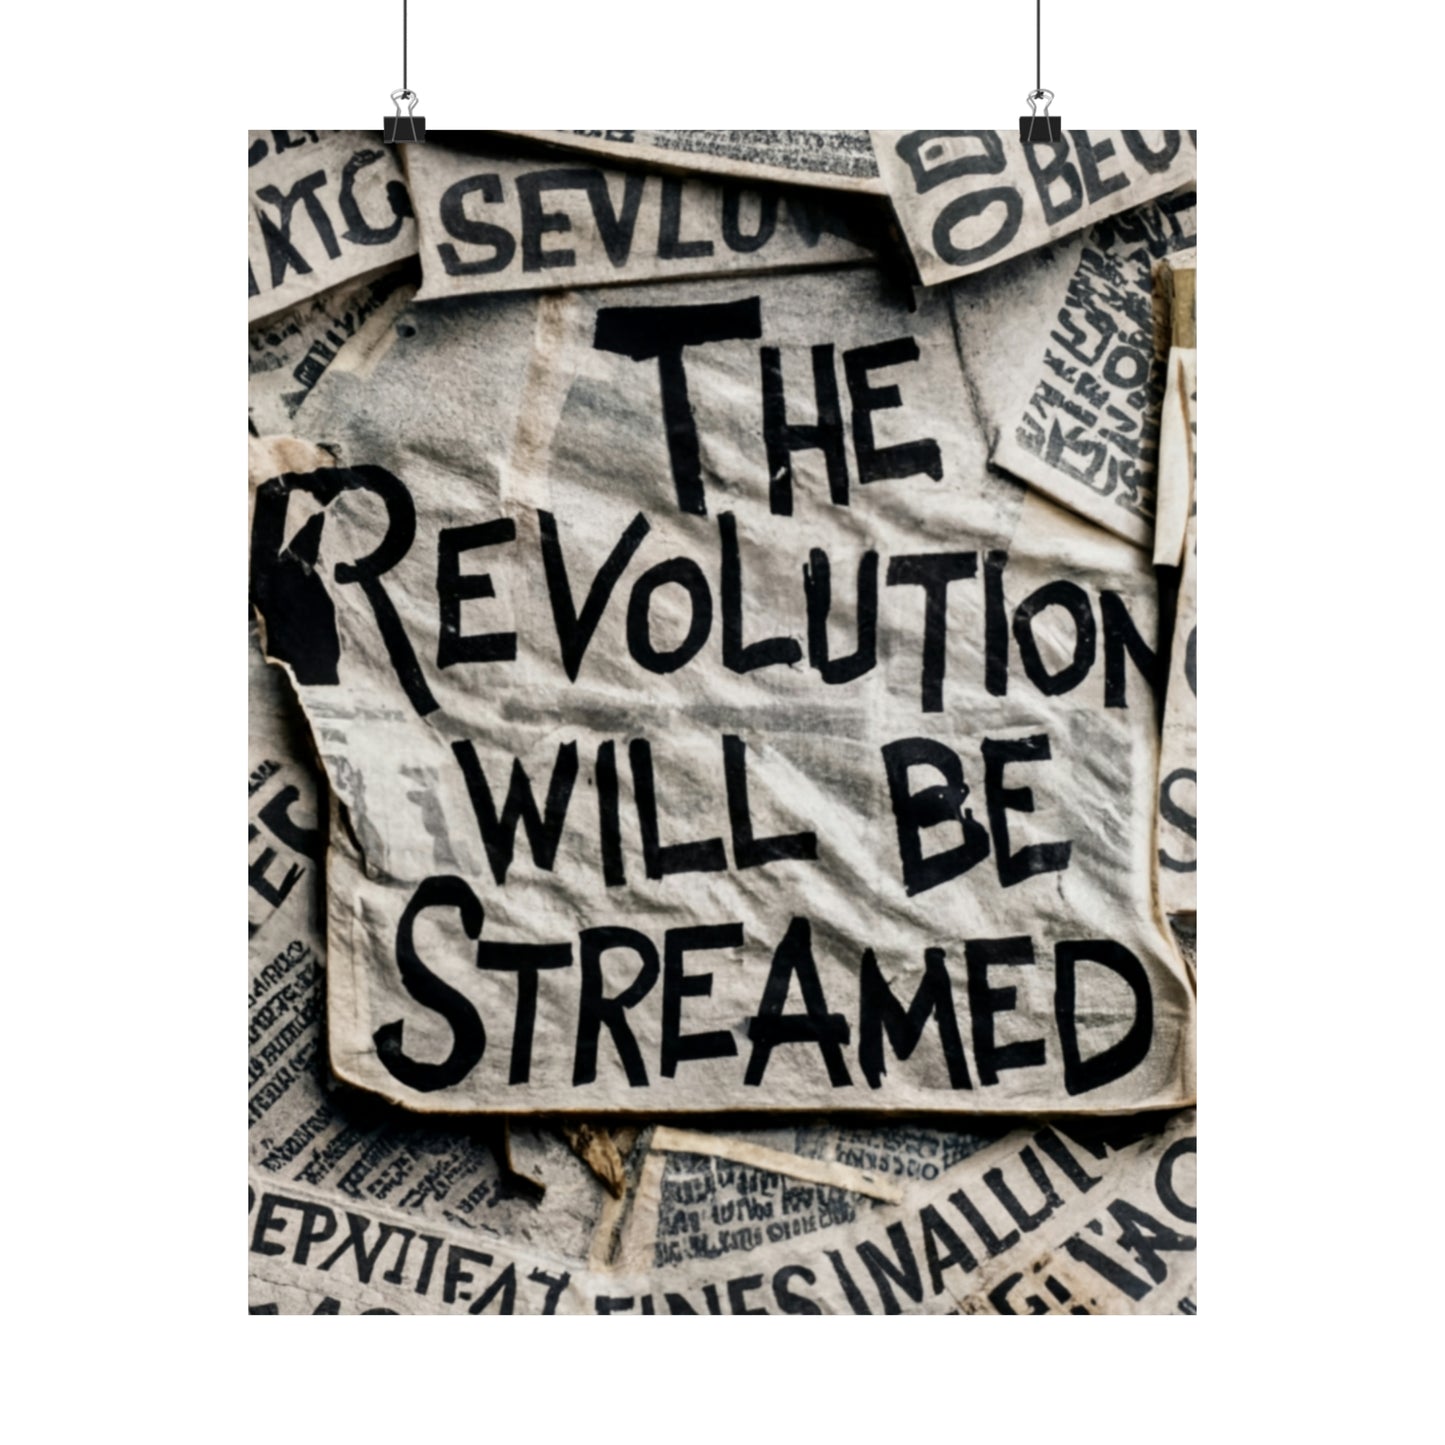 "The Revolution will be Streamed" Poster Prints